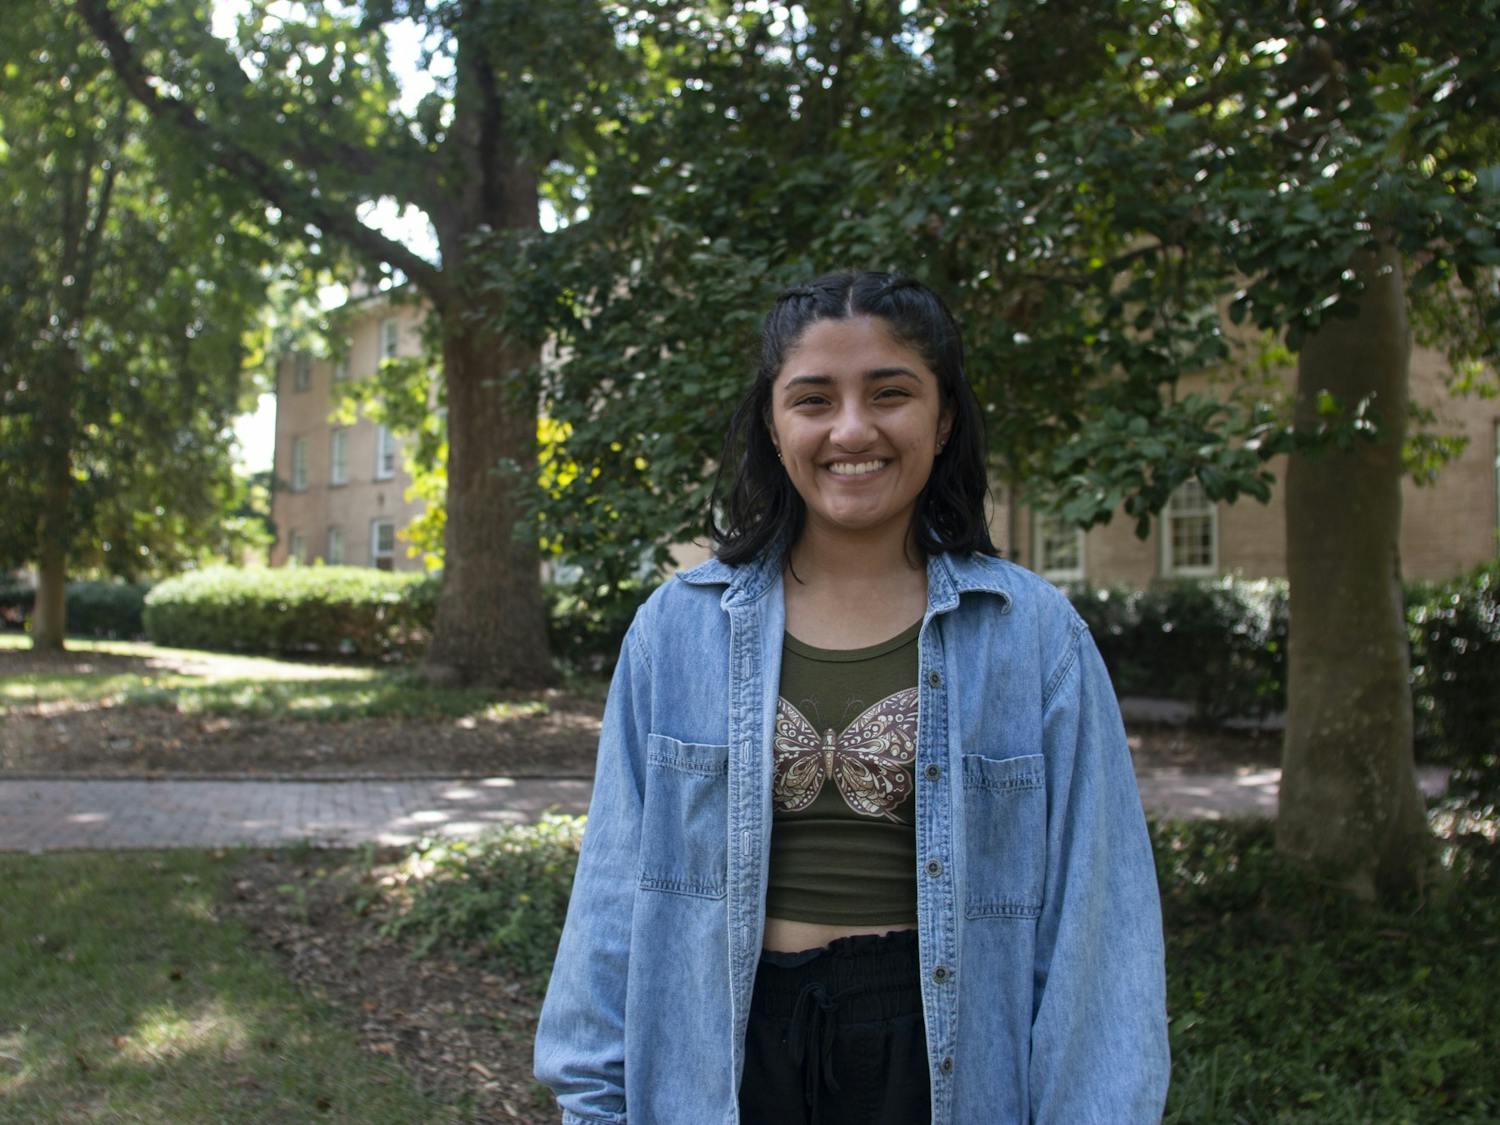 Sophomore Girija Joshi poses for a portrait in Chapel Hill, N.C. on Monday, Sept. 19, 2022. Joshi is the co-executive director of UNC Samaa.